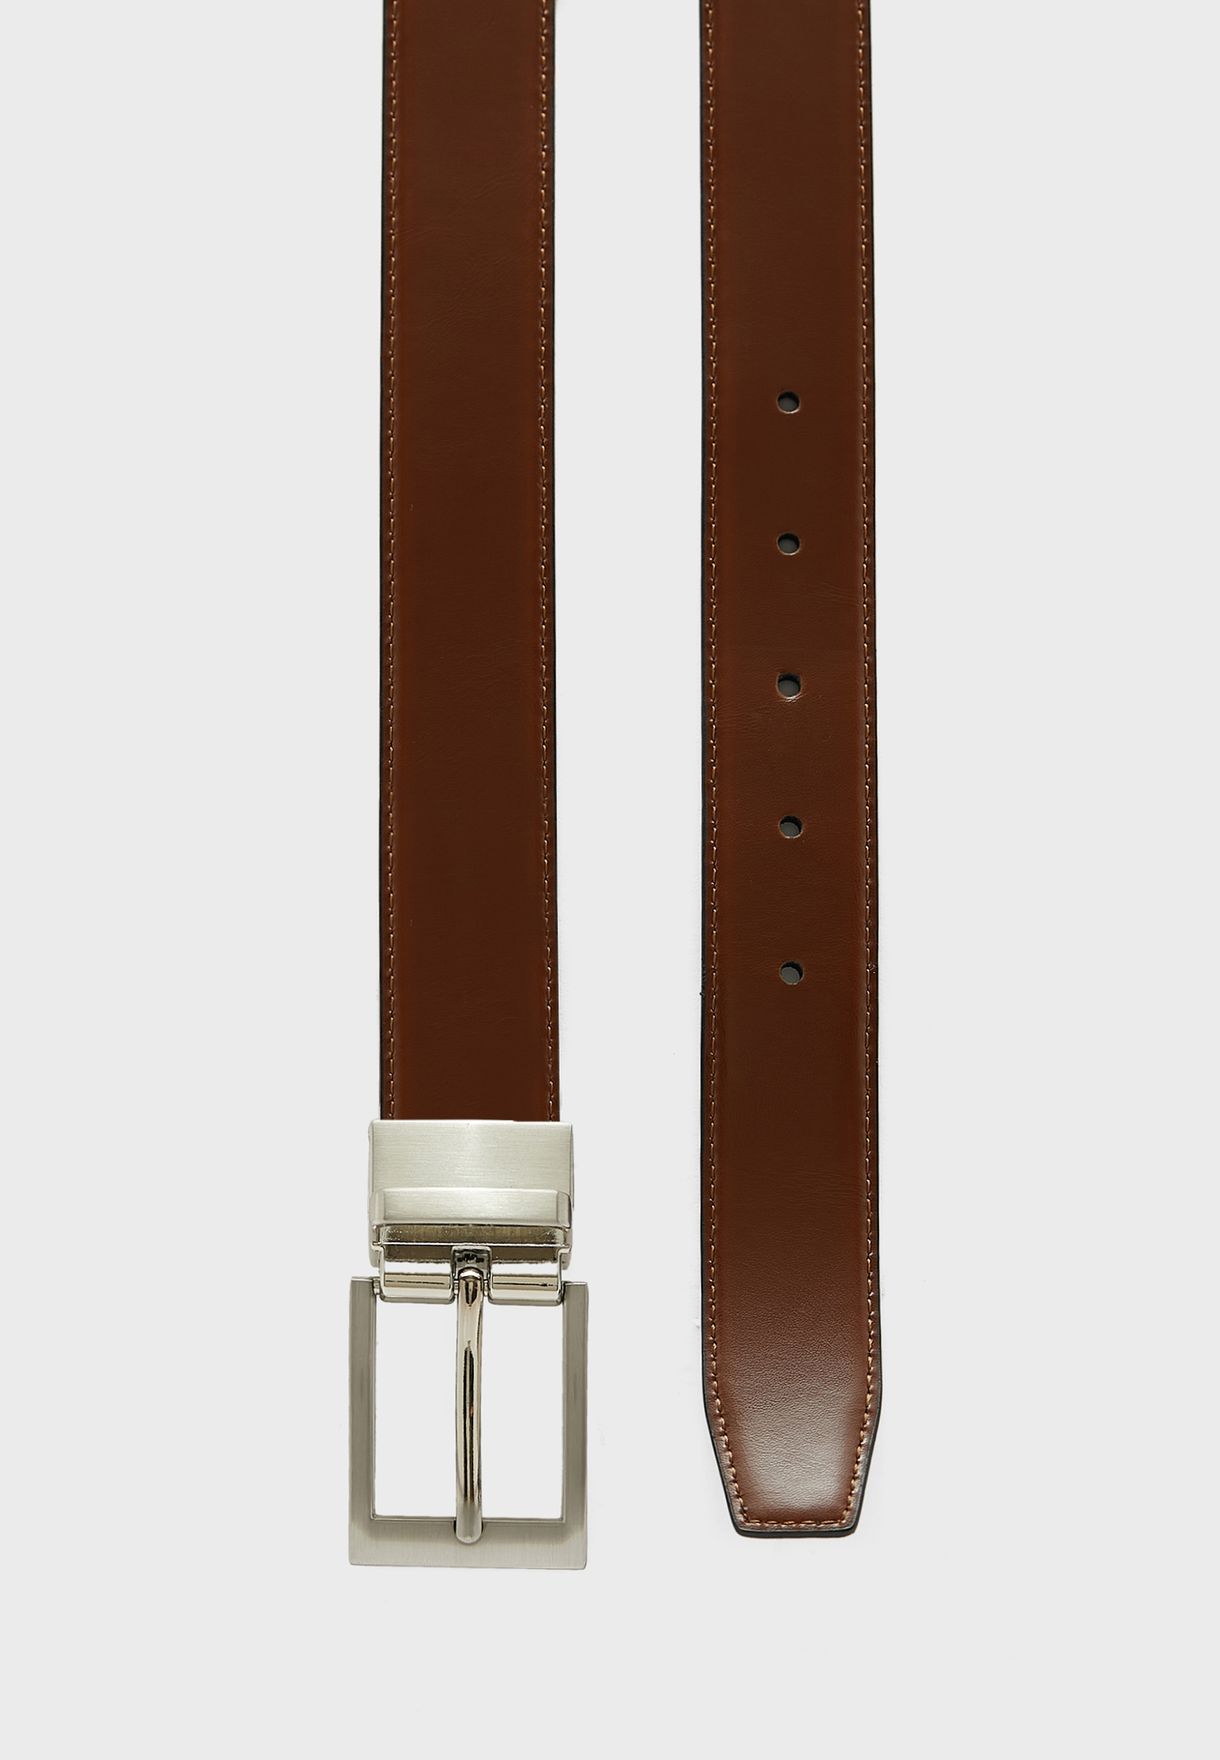 Reversible Allocated Hole Belt